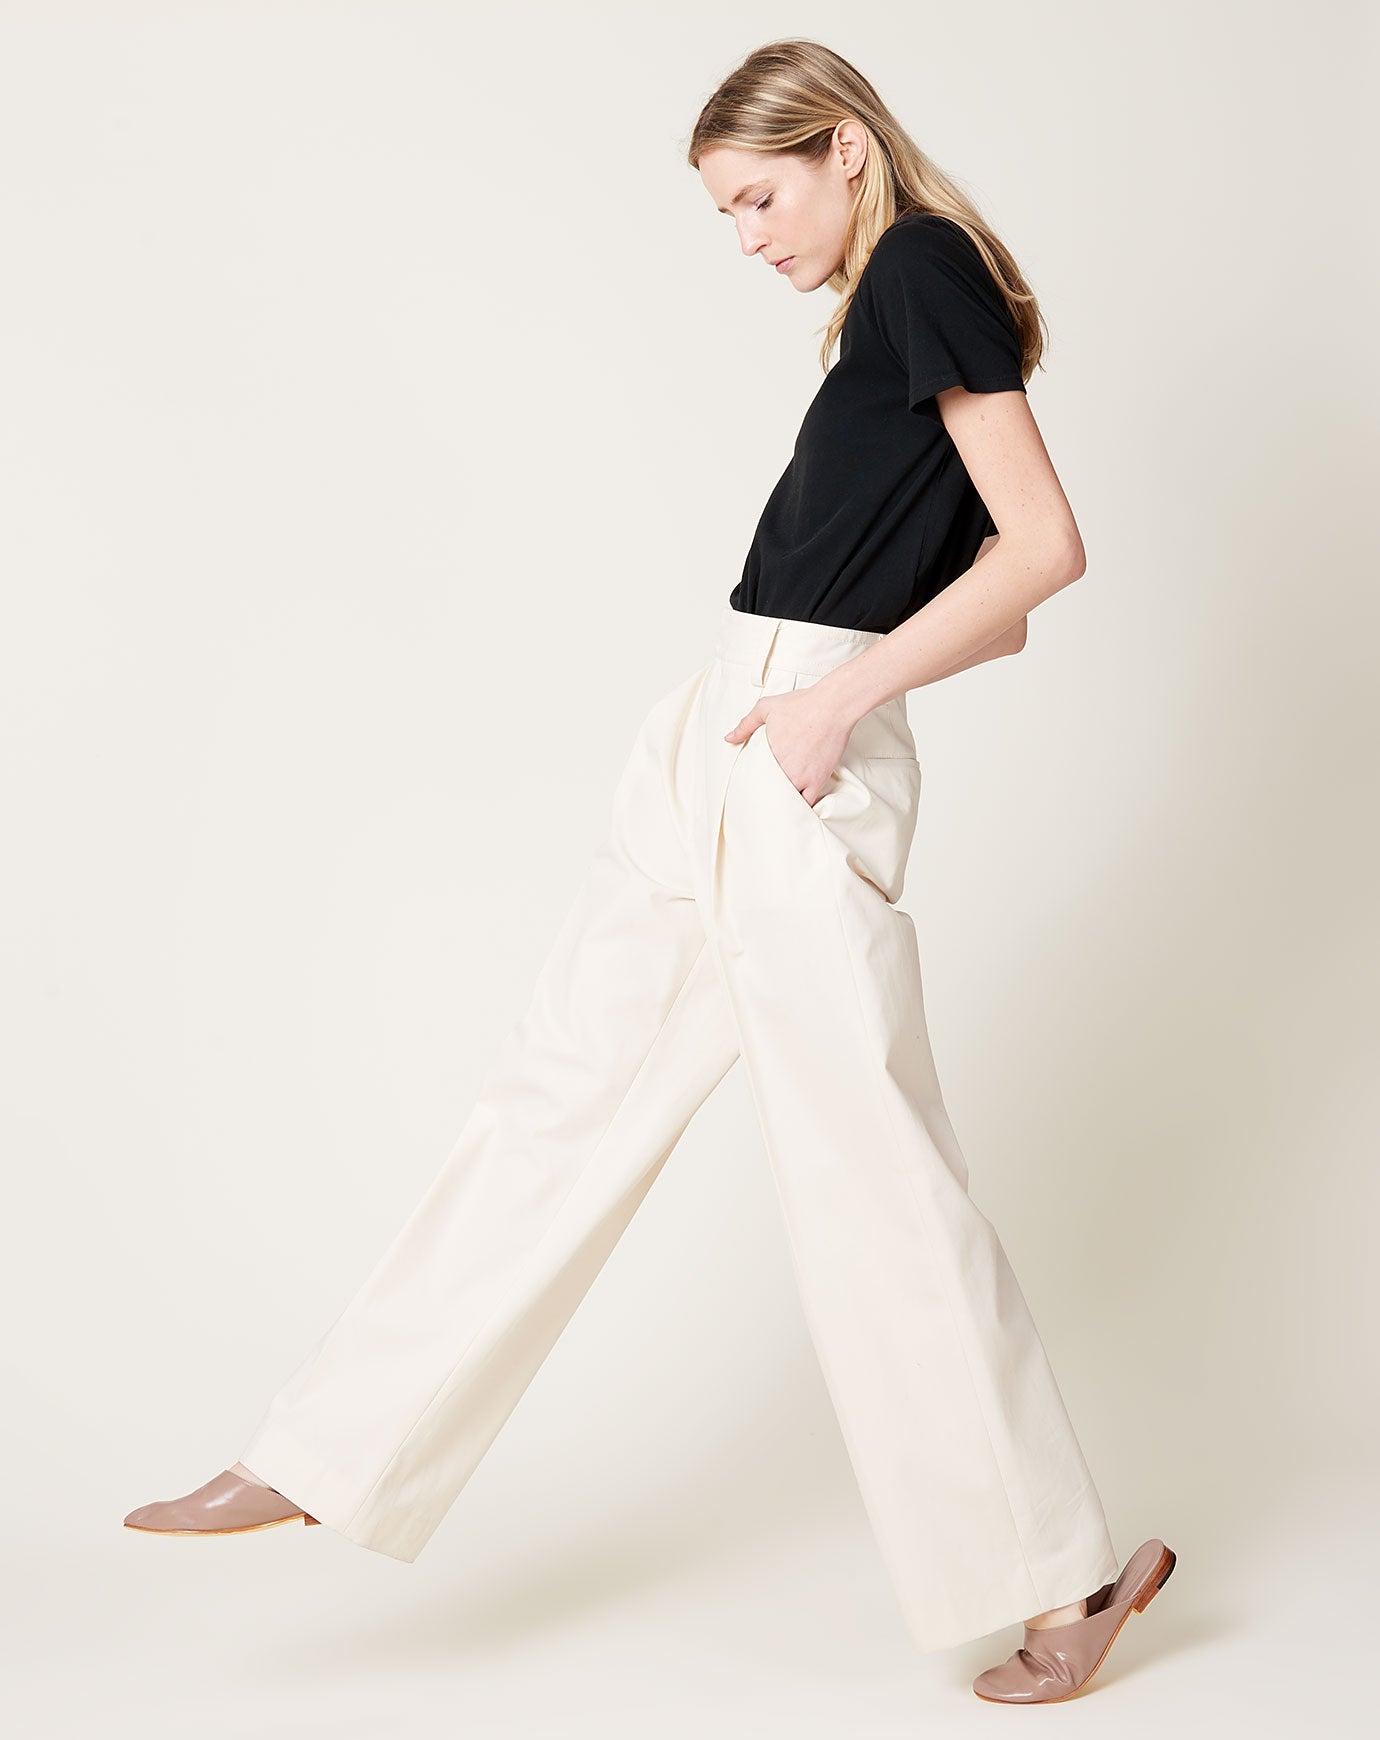 Maria McManus Mid Rise Pleat Front Pant in Ivory